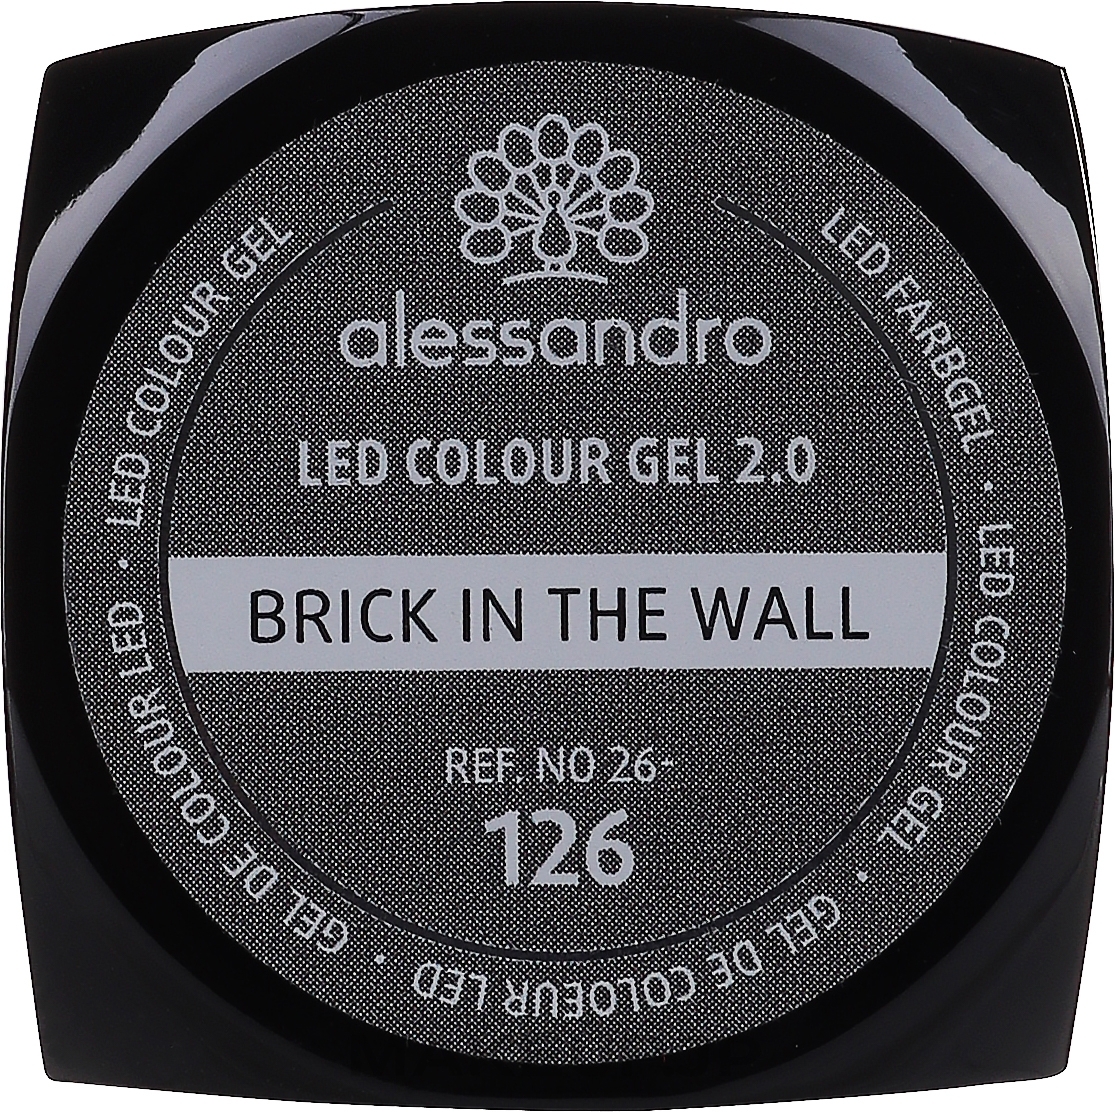 Nail Gel - Alessandro International LED Colour Gel 2.0 — photo 126 - Brick In The Wall